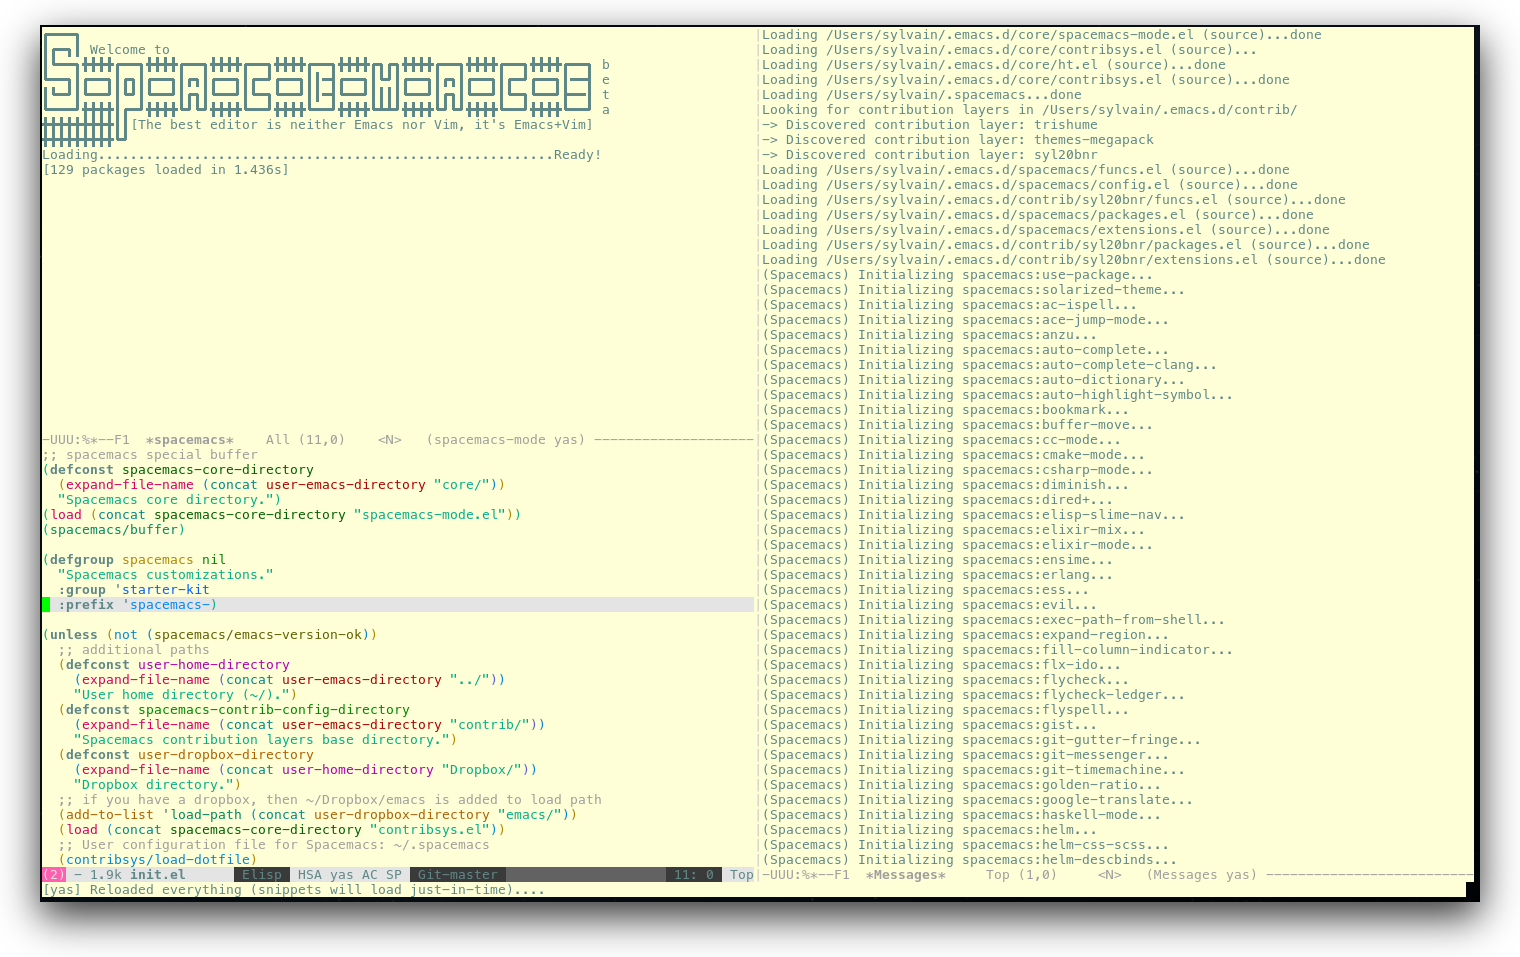 /TakeV/spacemacs/media/commit/f53620a1c8ad72c51d40942c169a3afe779f5088/doc/img/spacemacs-urxvt.png